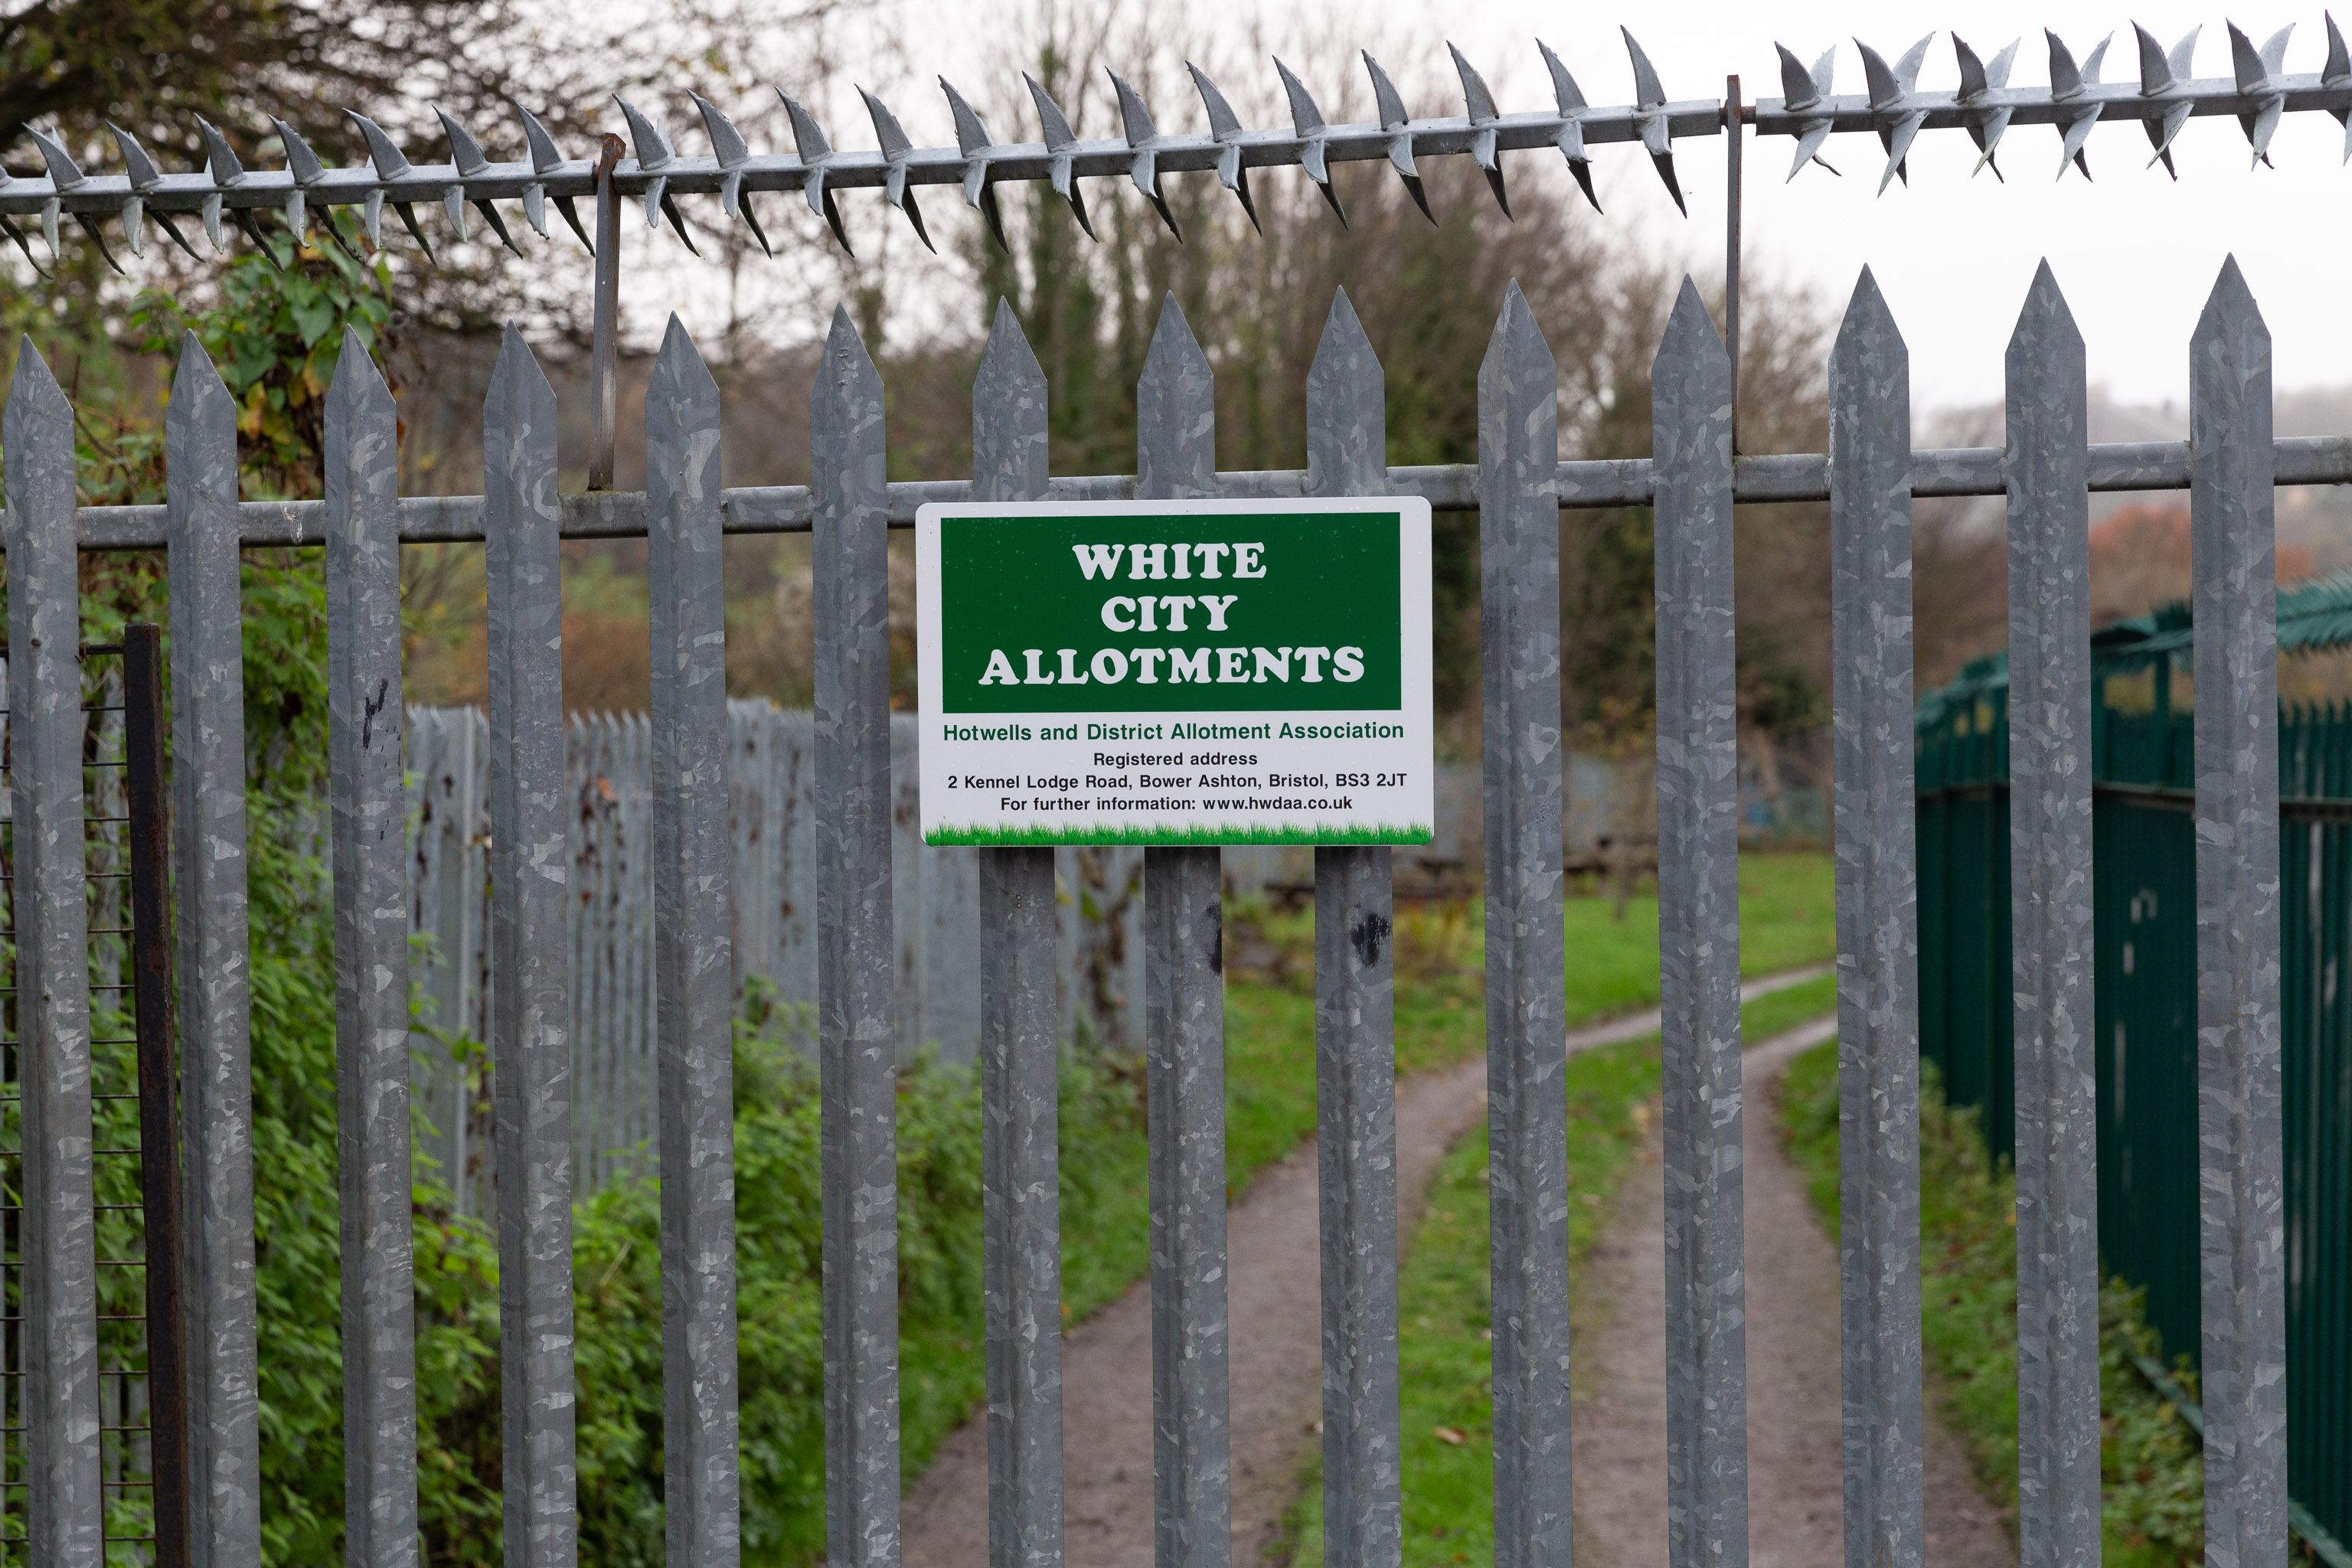 WHITE CITY ALLOTMENTS
Gosh. I had no idea why it's called the White City Allotments, but apparently: 


  Bristol International Exhibition opened in May 1914 promising t...